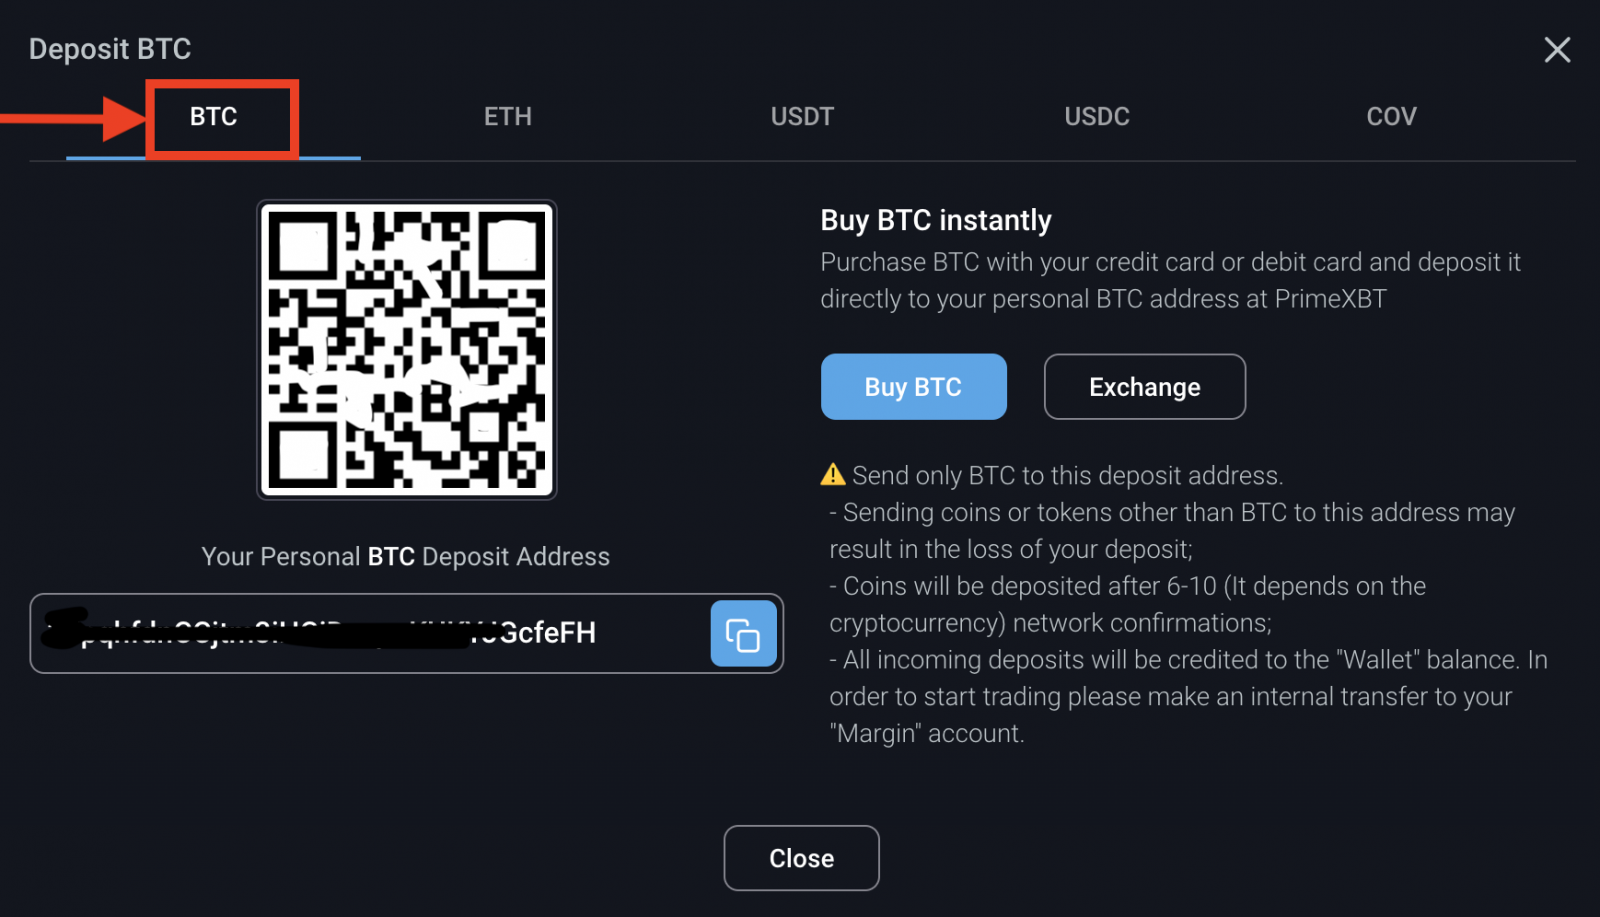 Take BTC as an example in Primexbt: